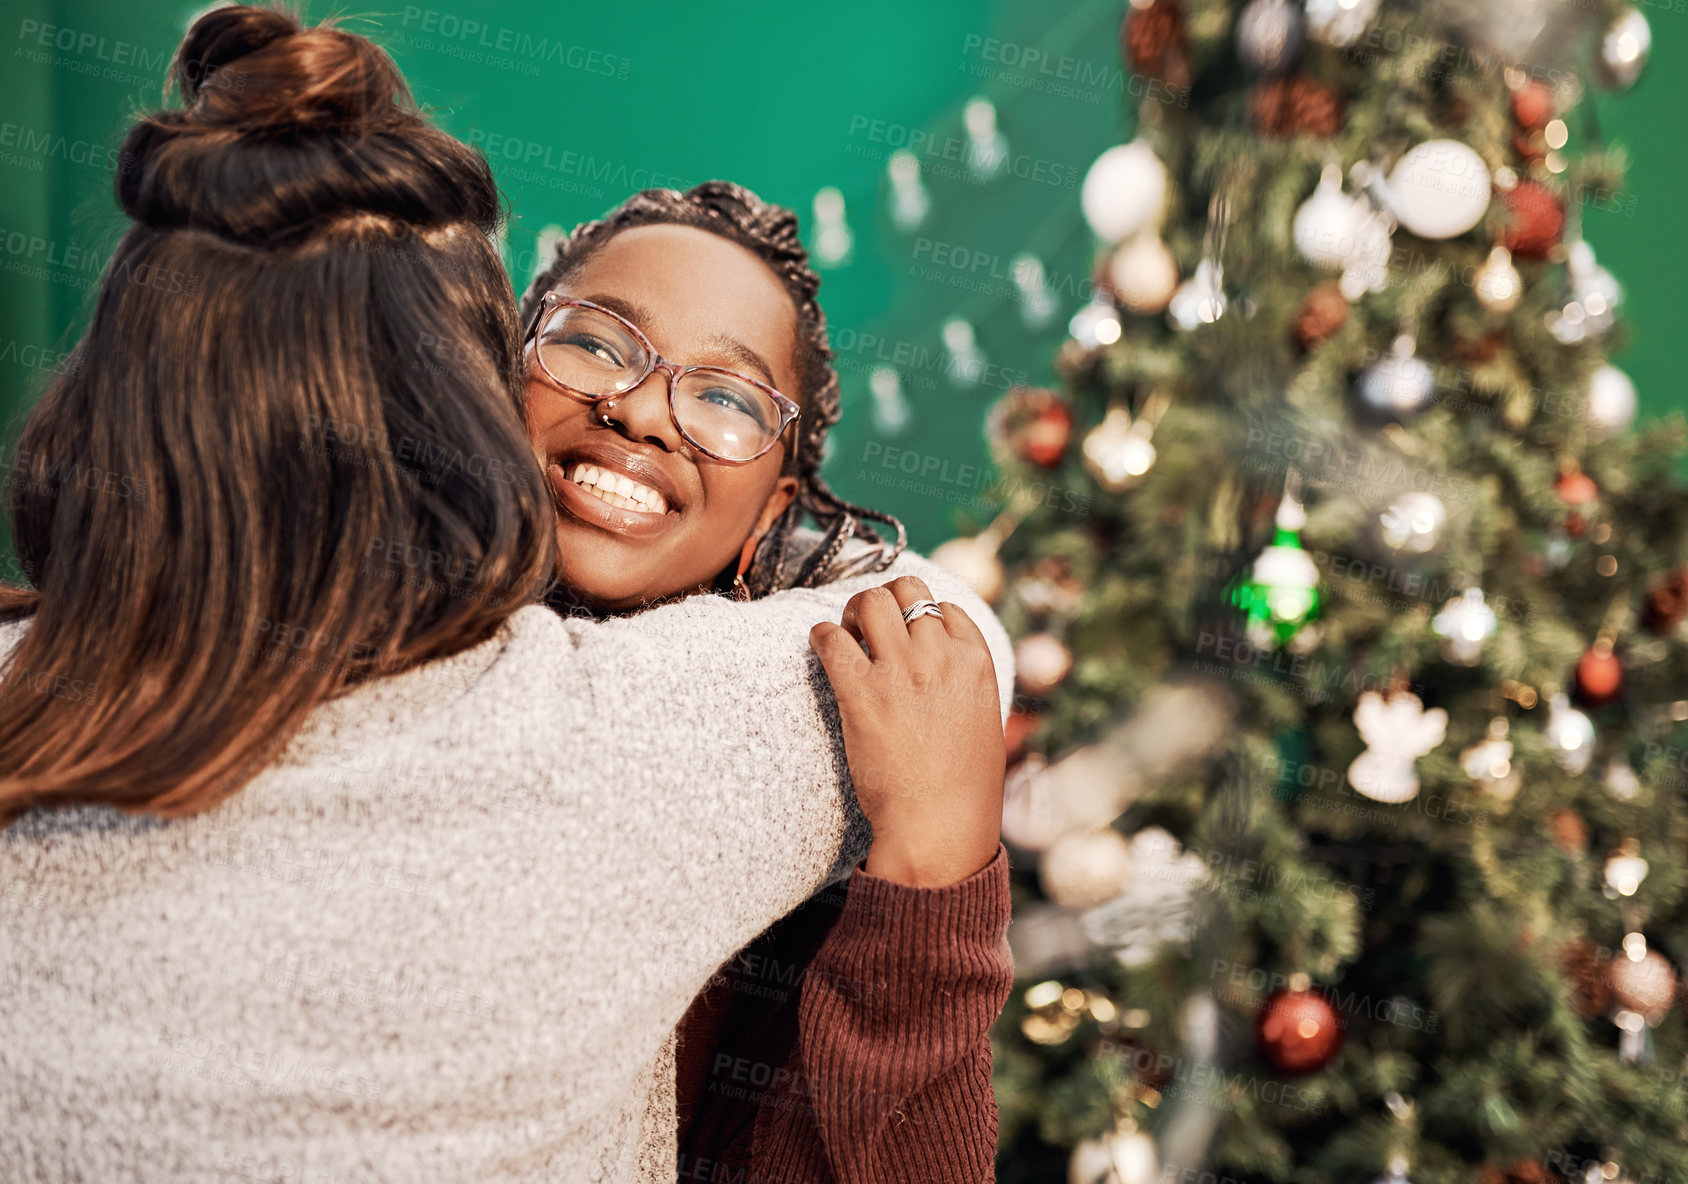 Buy stock photo Shot of two happy young women hugging each other during Christmas at home